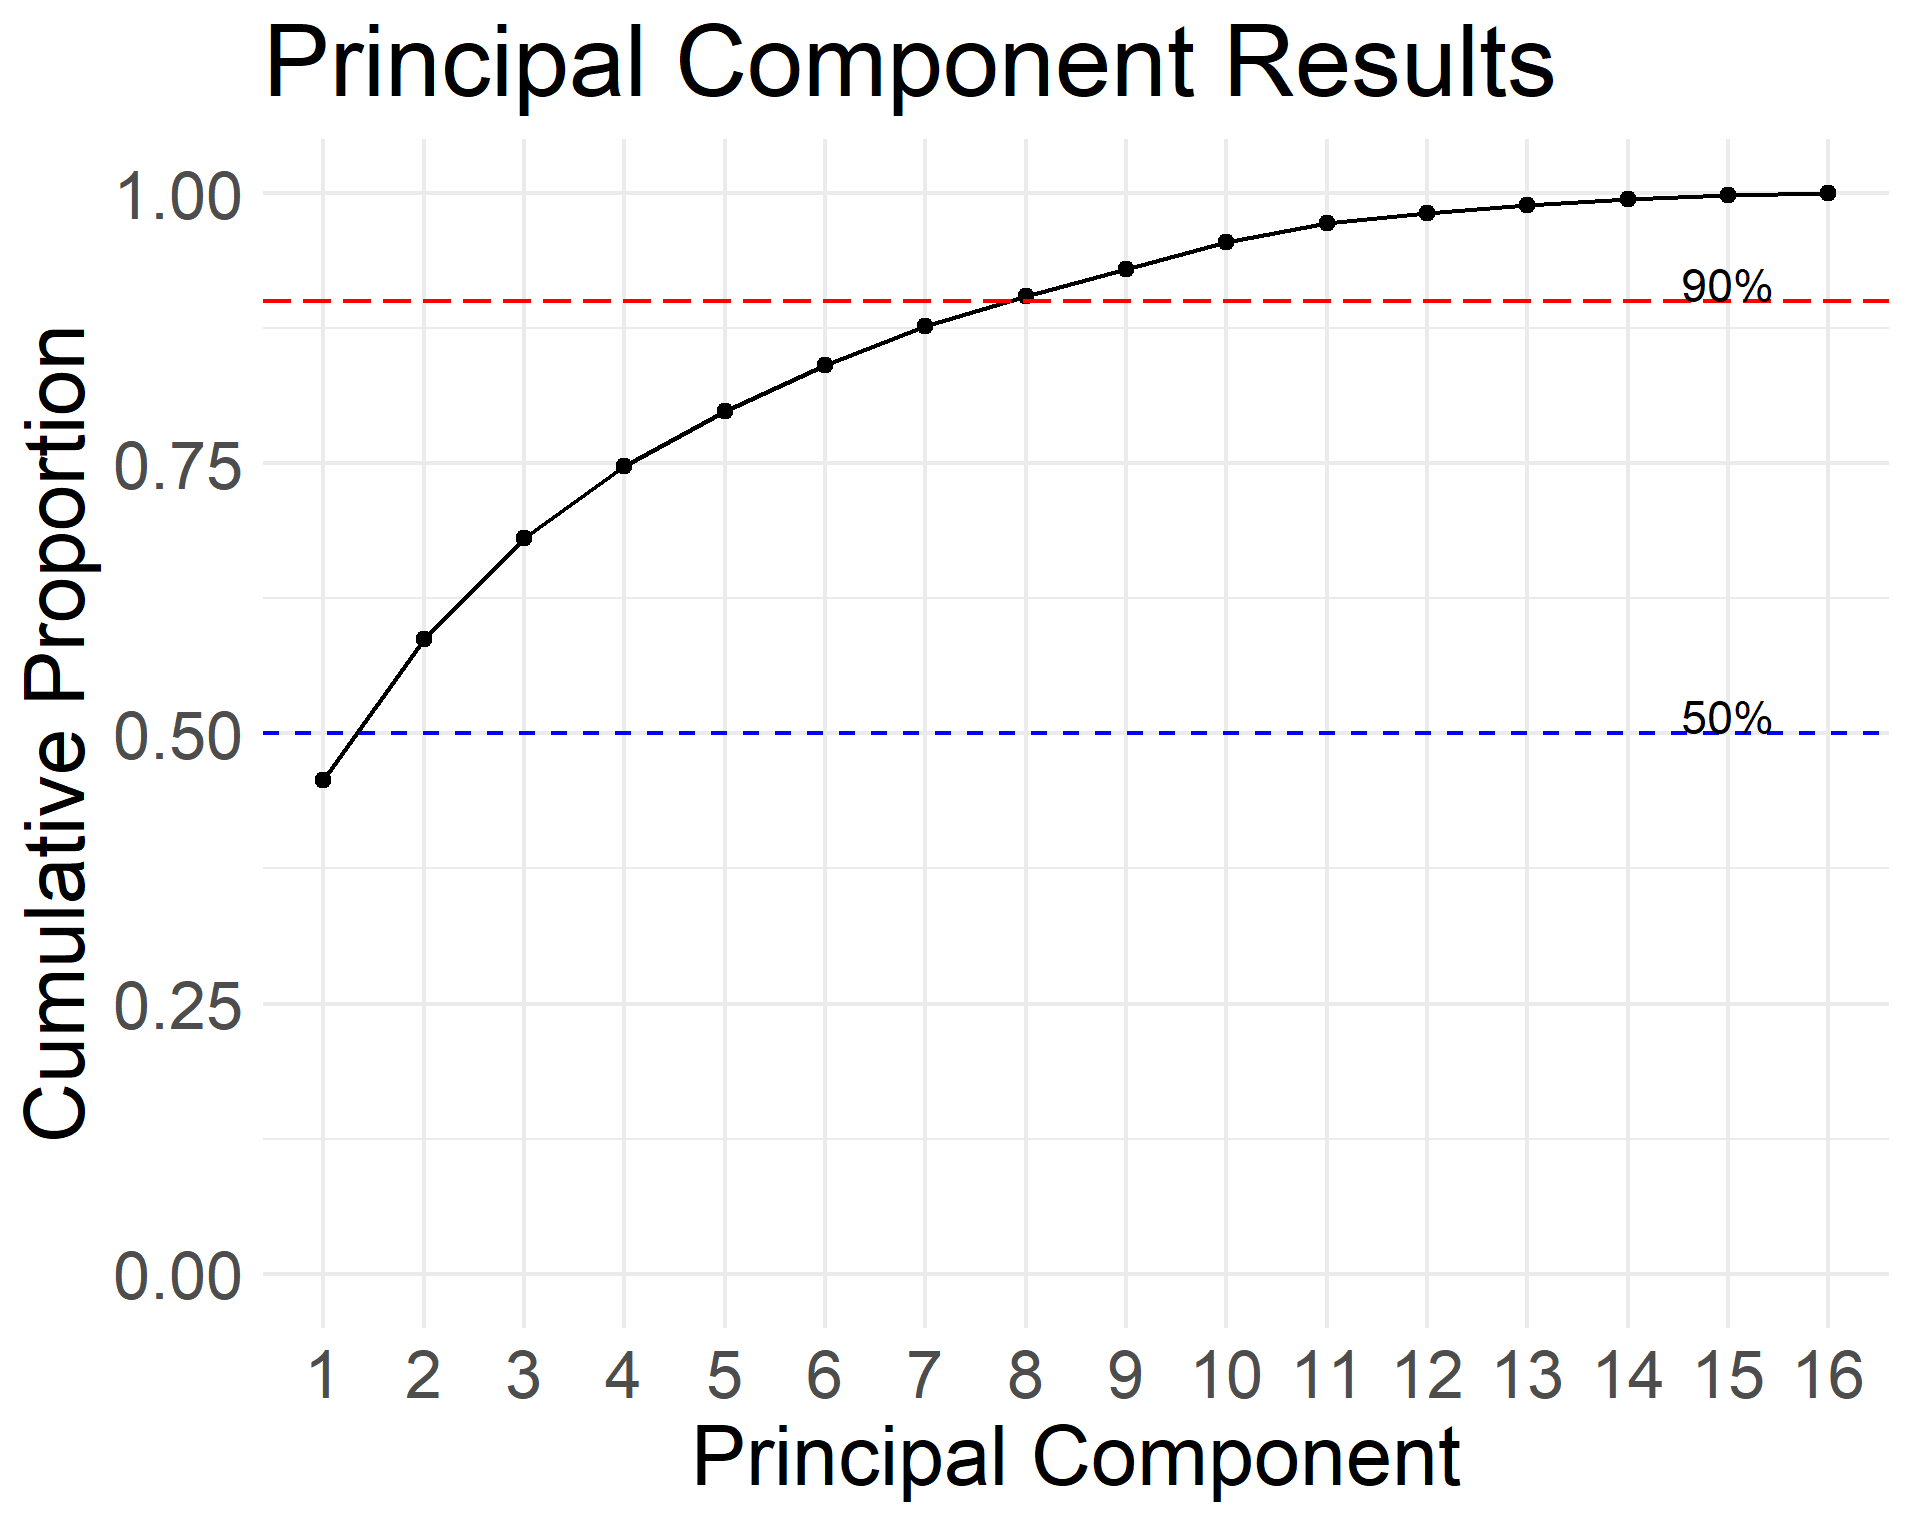 **PCA results.** Cumulative proporation of explained variance using PCA from the learner self-assessment survey. The PCA results show that half the questions (8) account for more than 90% of the explained variance and 1 principle component accounts for 46%.